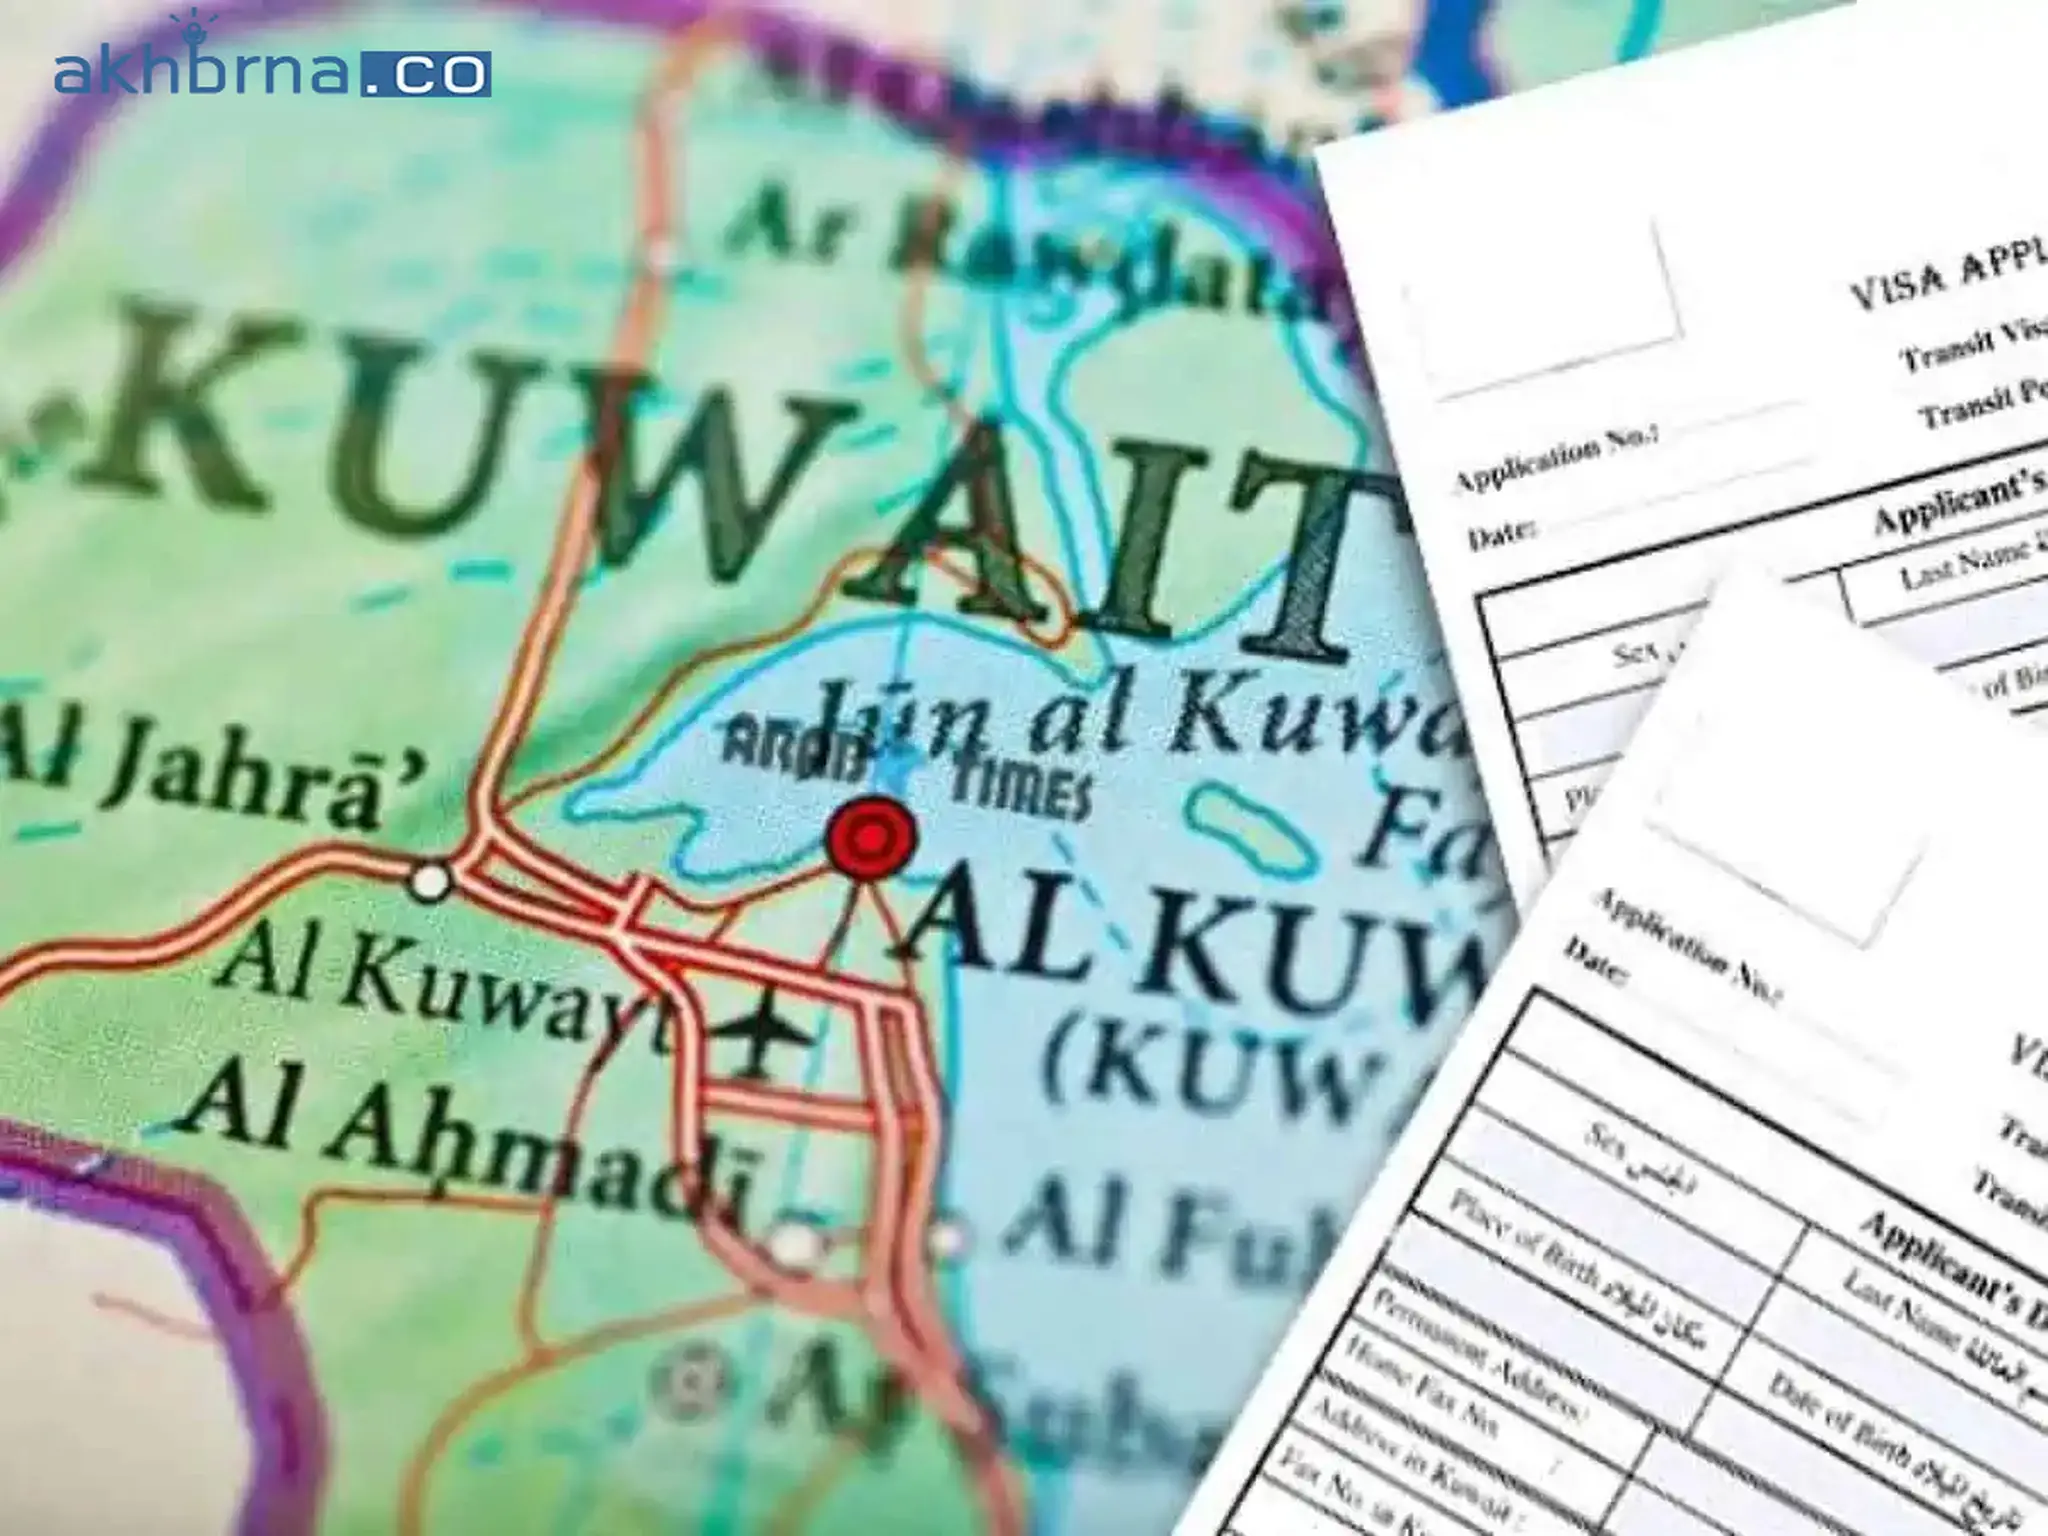 Kuwait resumes family visas with updated criteria, exemptions and application